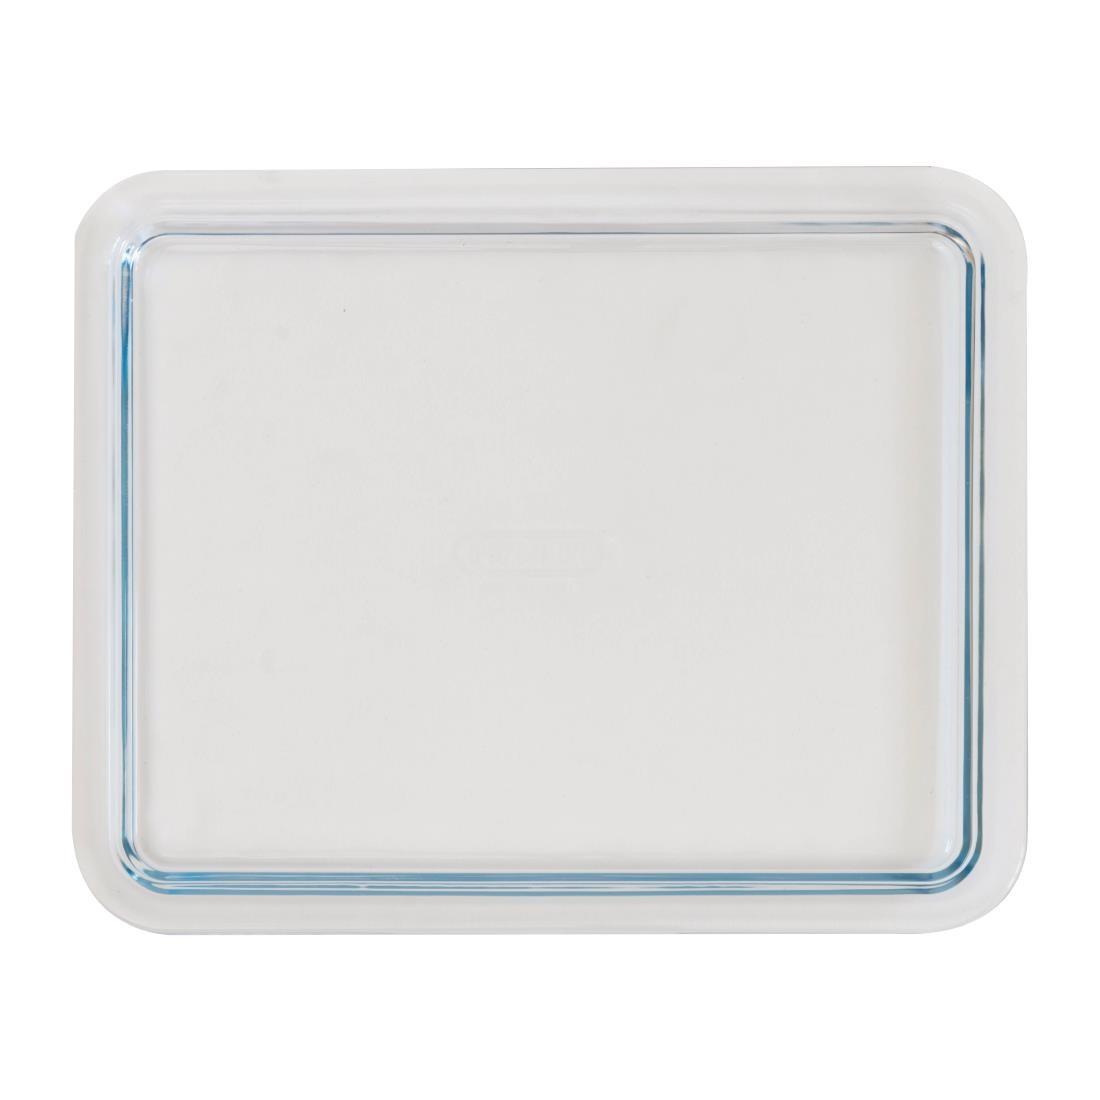 Pyrex FS362 Cook & Care Glass Tray 25 x 20cm